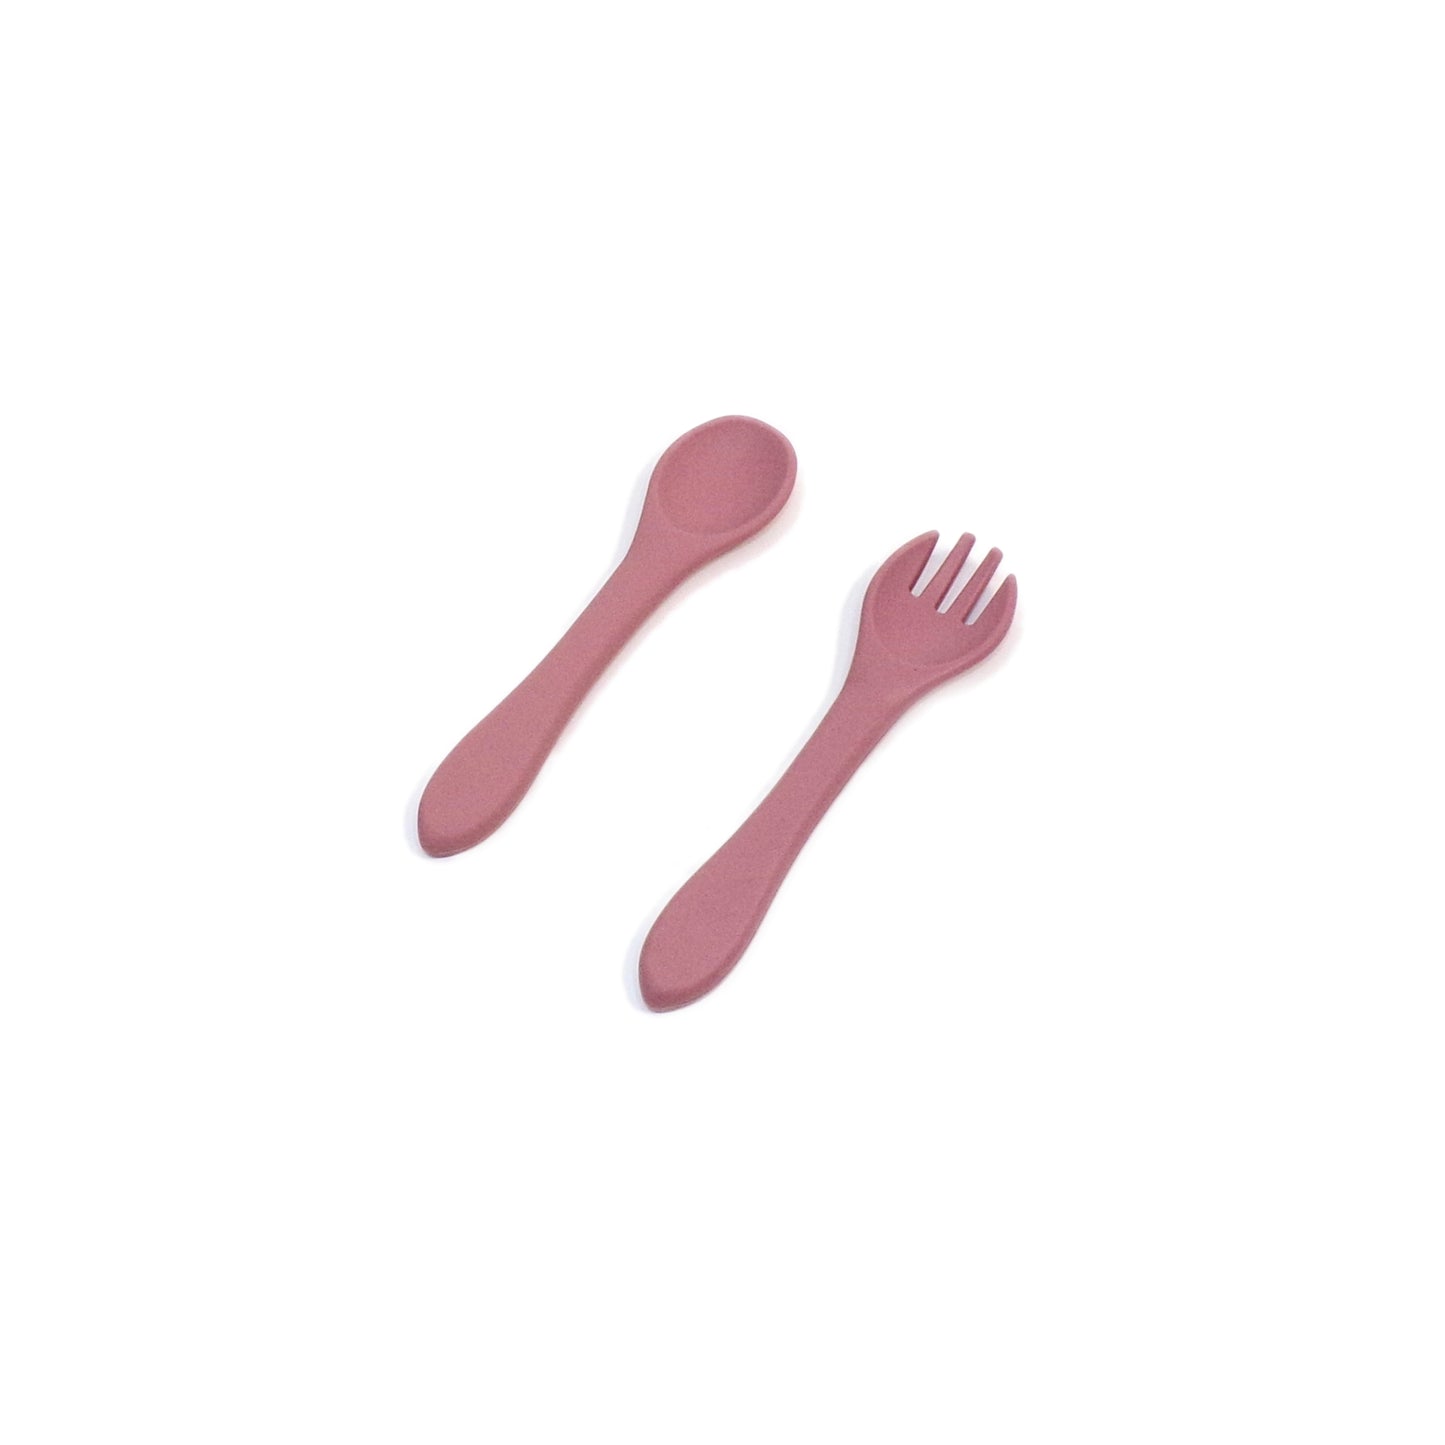 A set of pink silicone cutlery, a fork and spoon. The utensils are designed for young children.